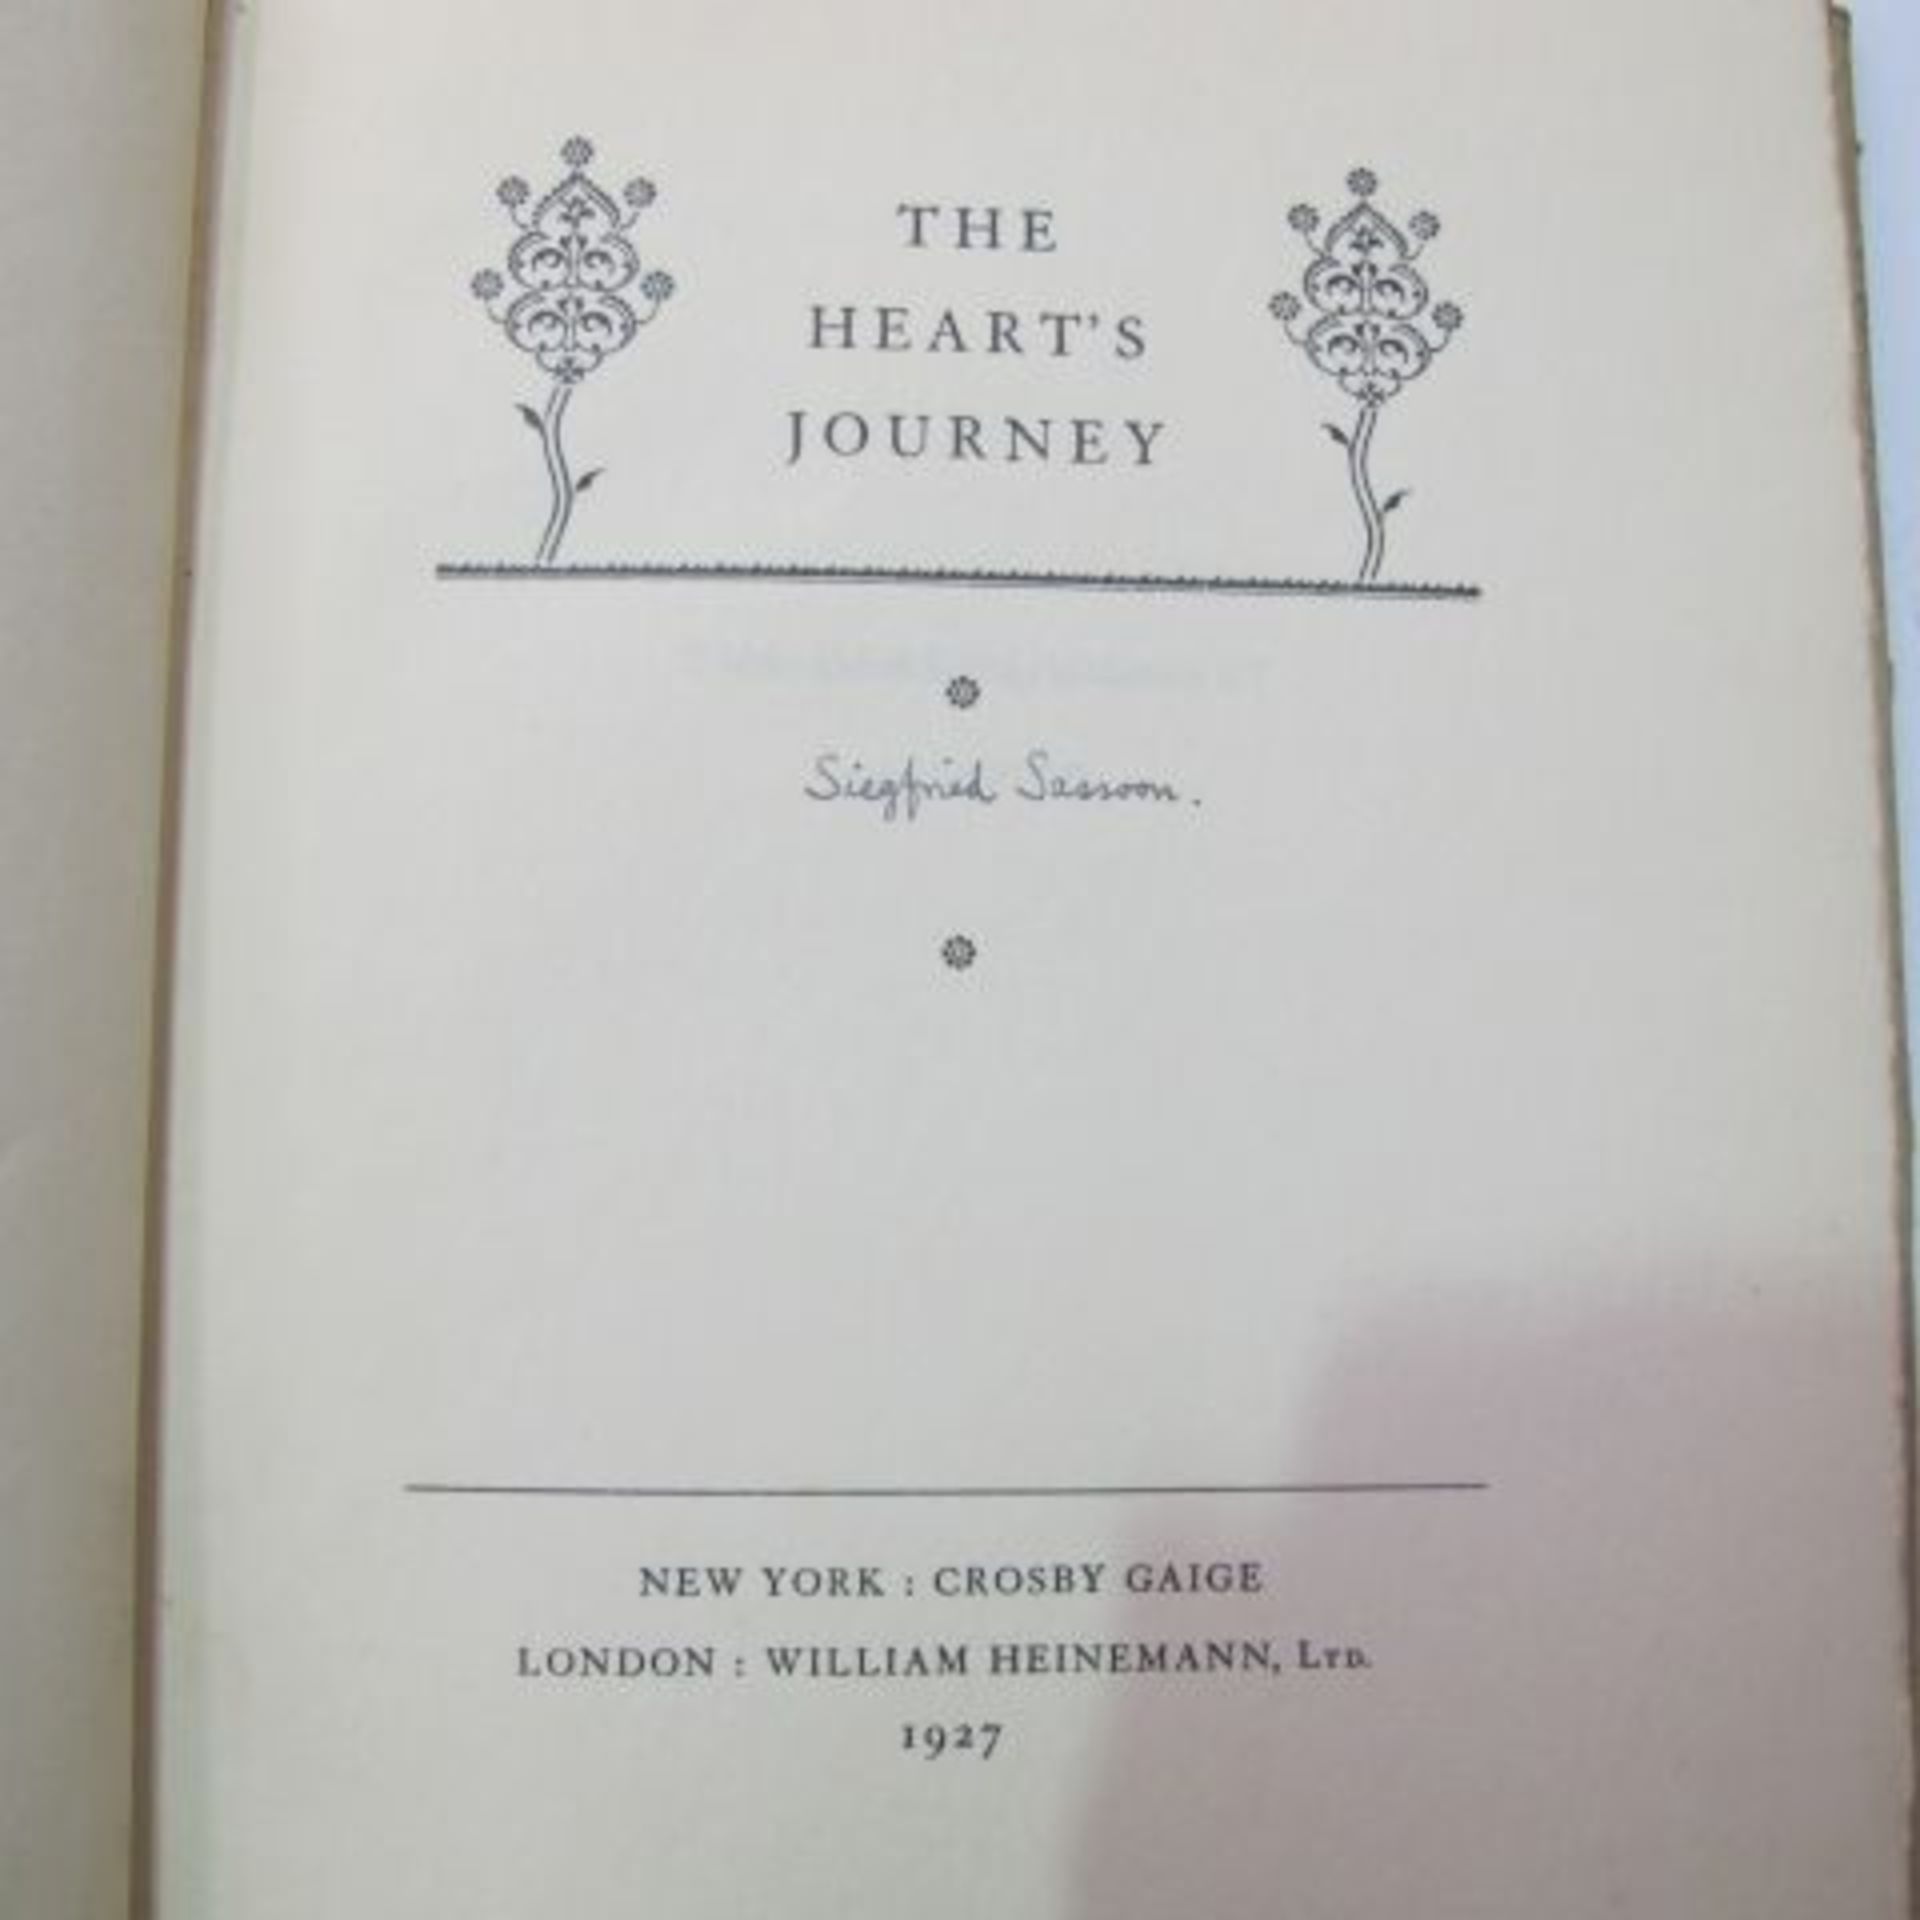 A hardback copy with dust cover of The Heart's Journey by Siegfried Sasson. The dust jacket - Image 3 of 3